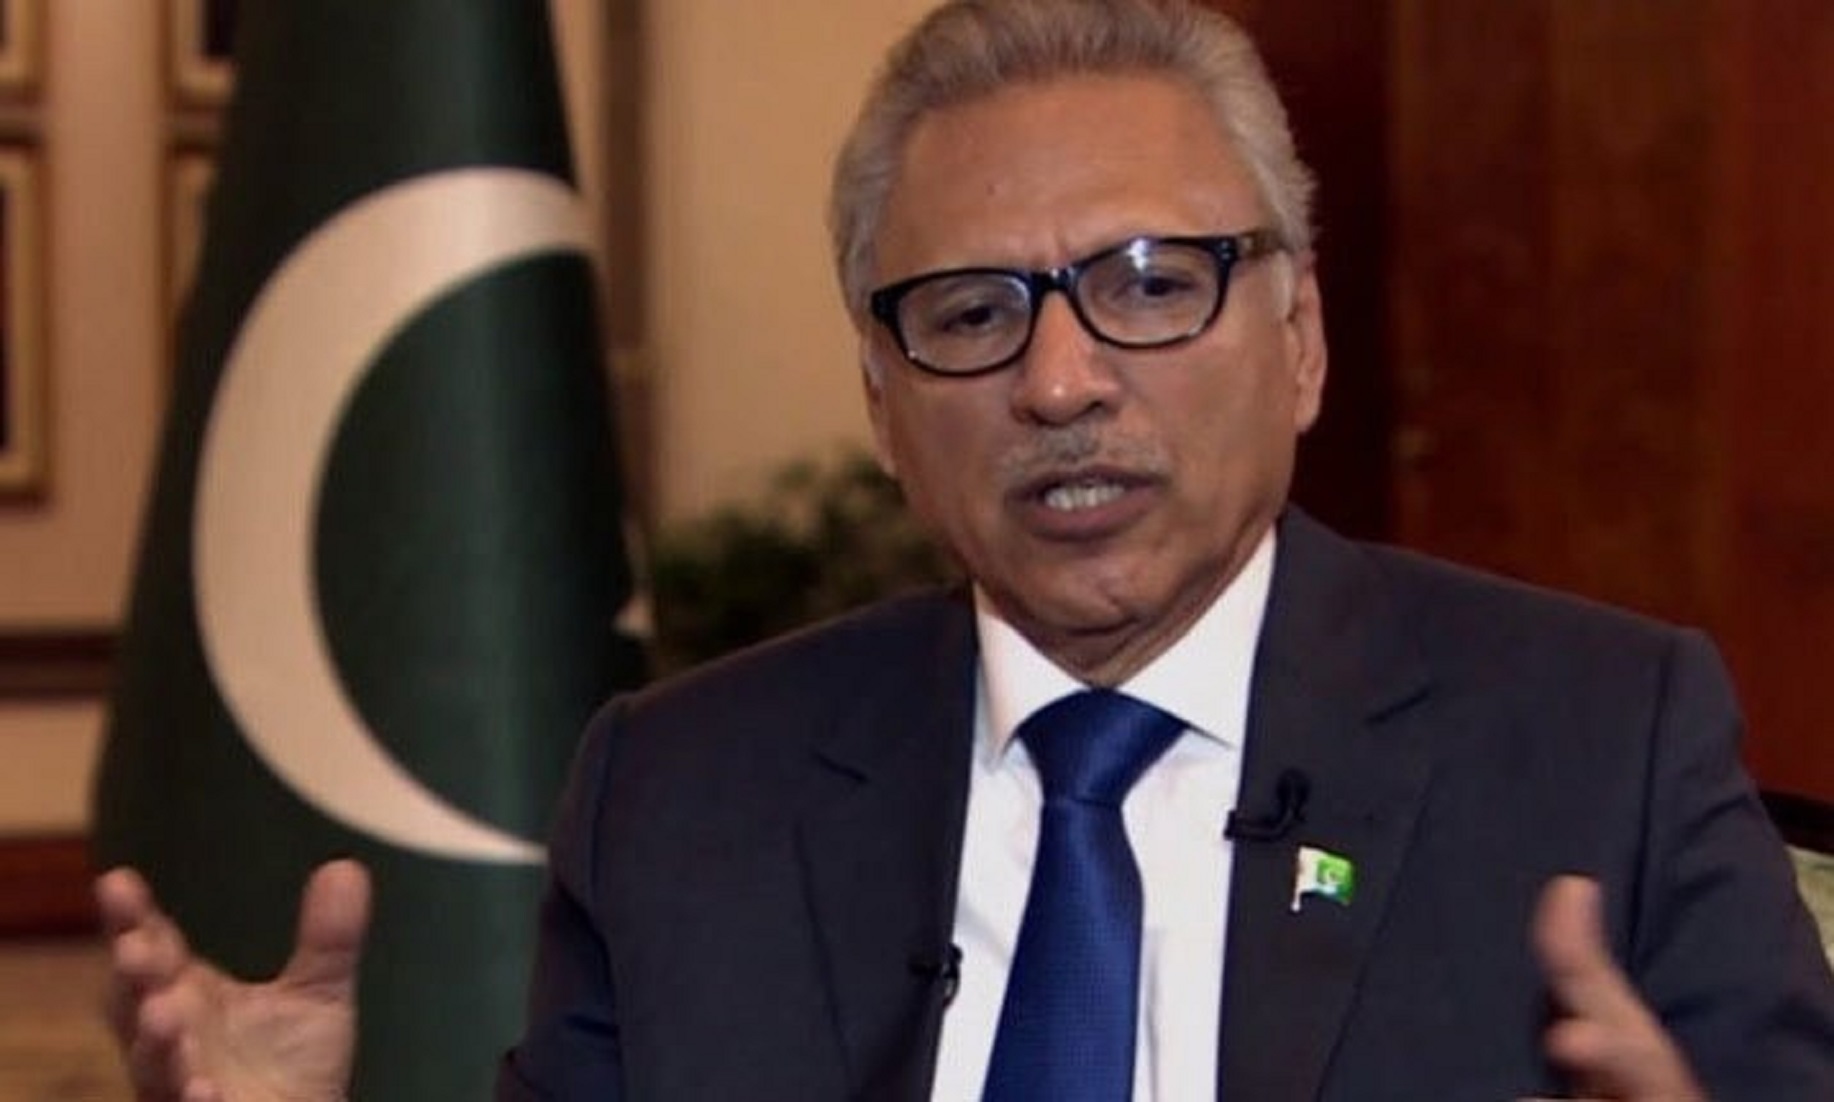 Pakistan To Continue Advancing Ties With China After Karachi Attack, Says President